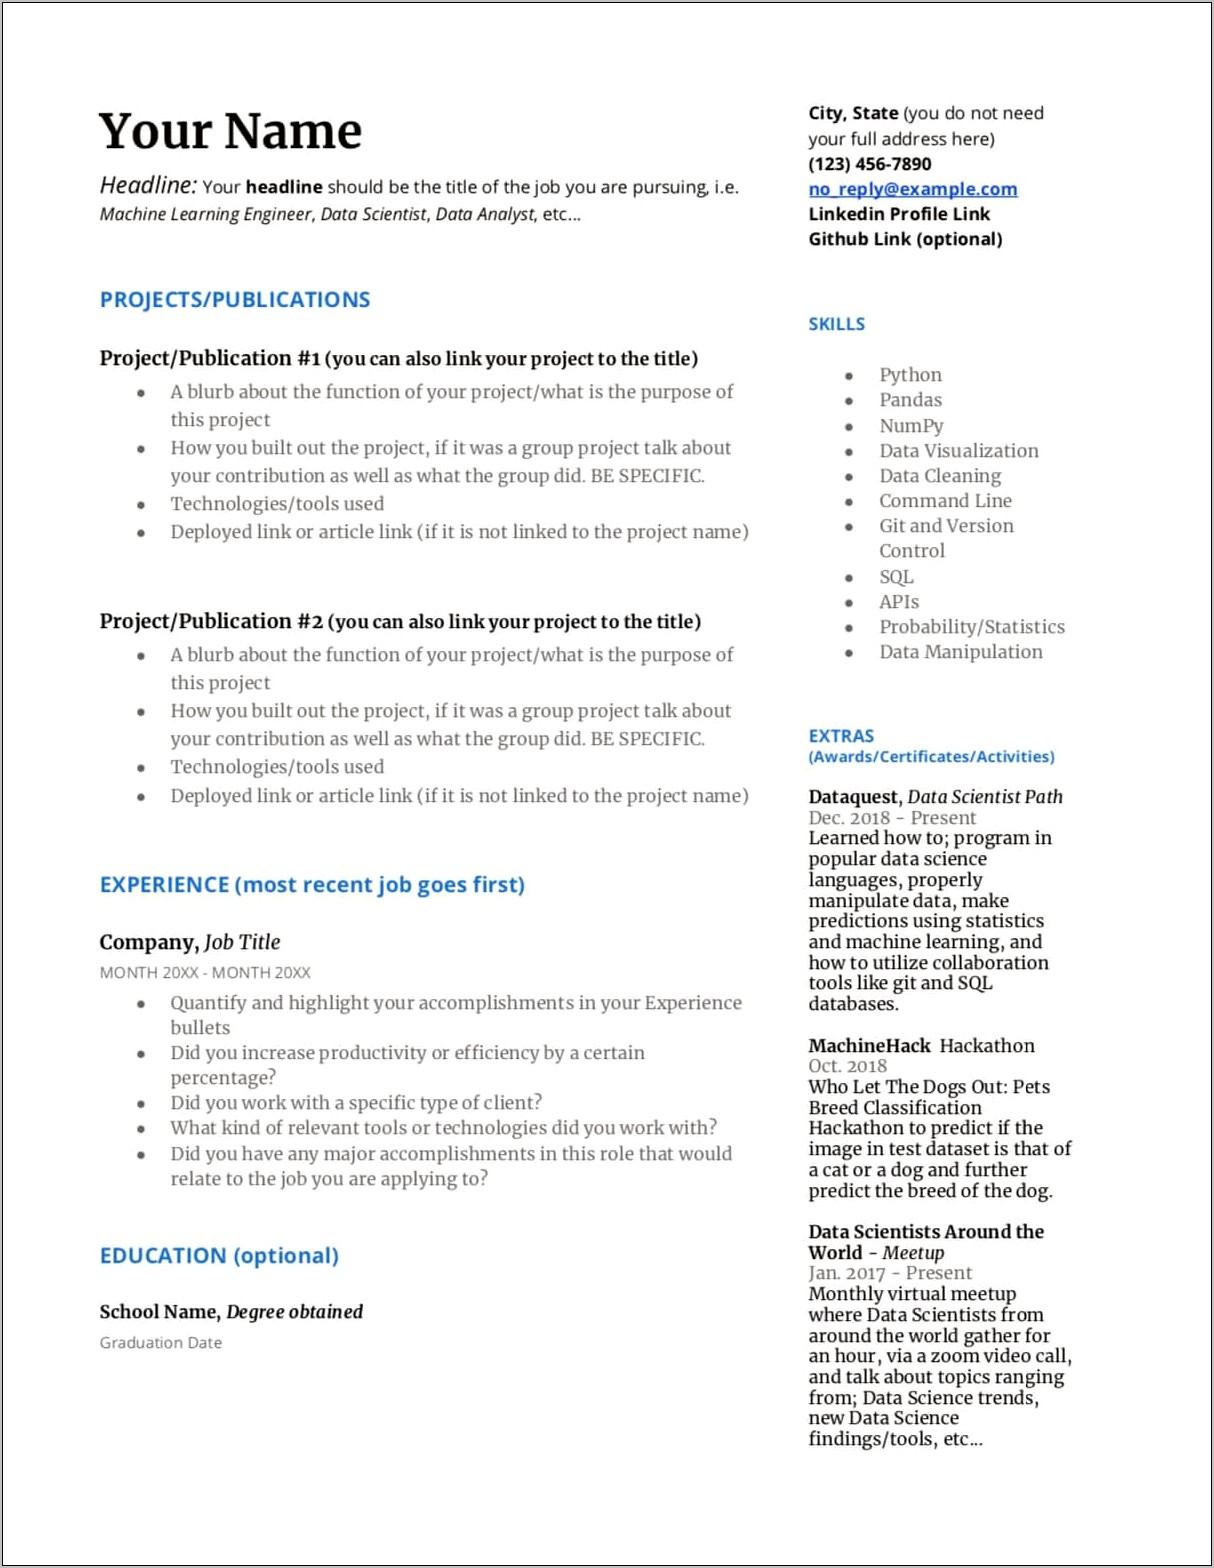 Resume Responsibilities And Achievements Examples